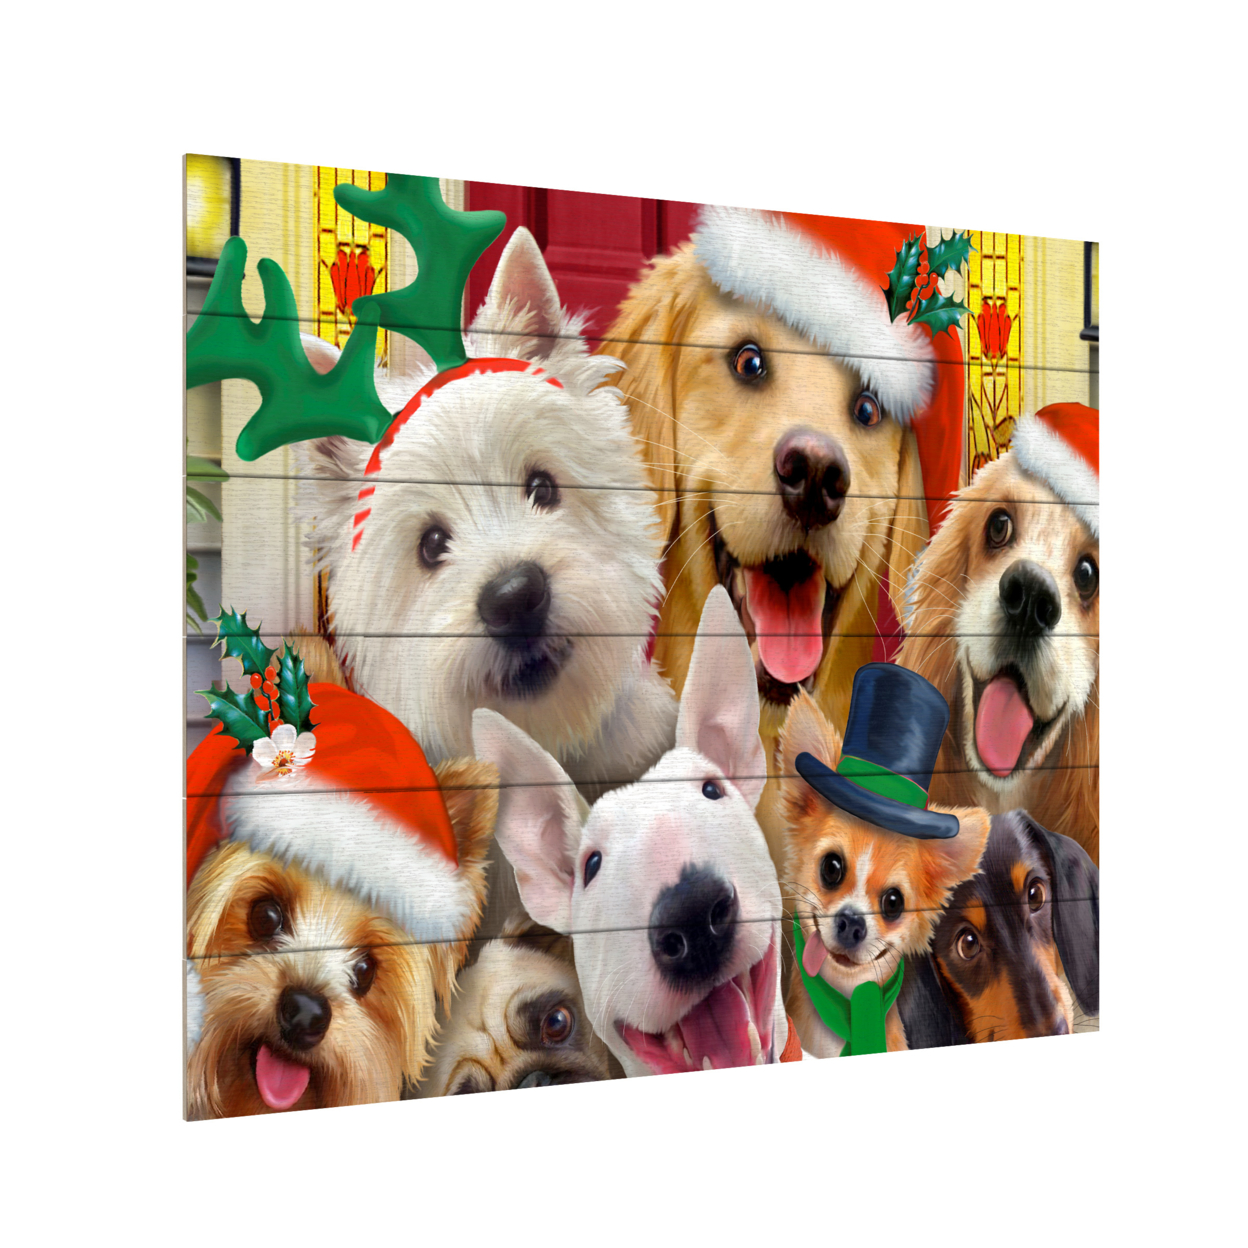 Wooden Slat Art 18 X 22 Inches Titled Christmas Dogs Ready To Hang Home Decor Picture